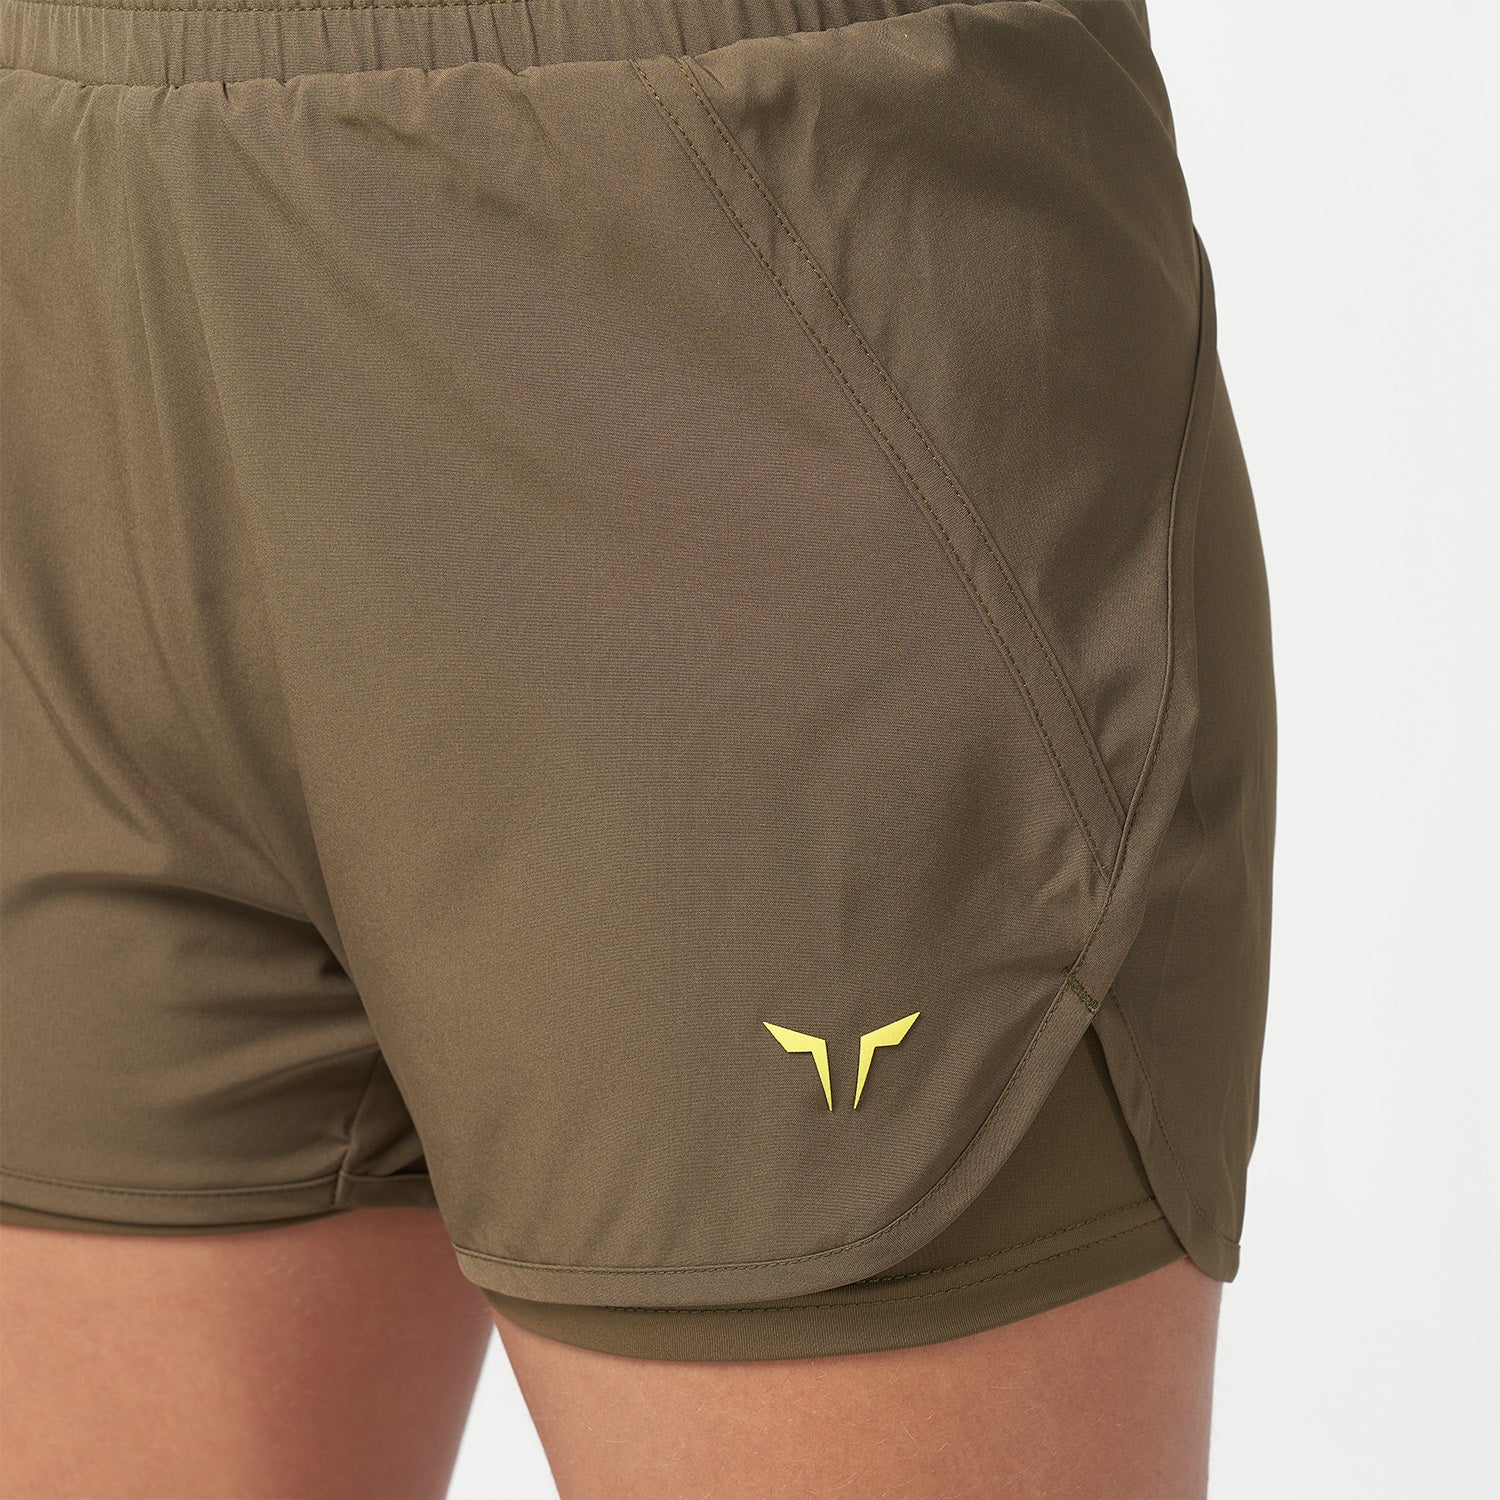 squatwolf-workout-clothes-lab360-never-stop-2-In-1-shorts-green-gym-shorts-for-women